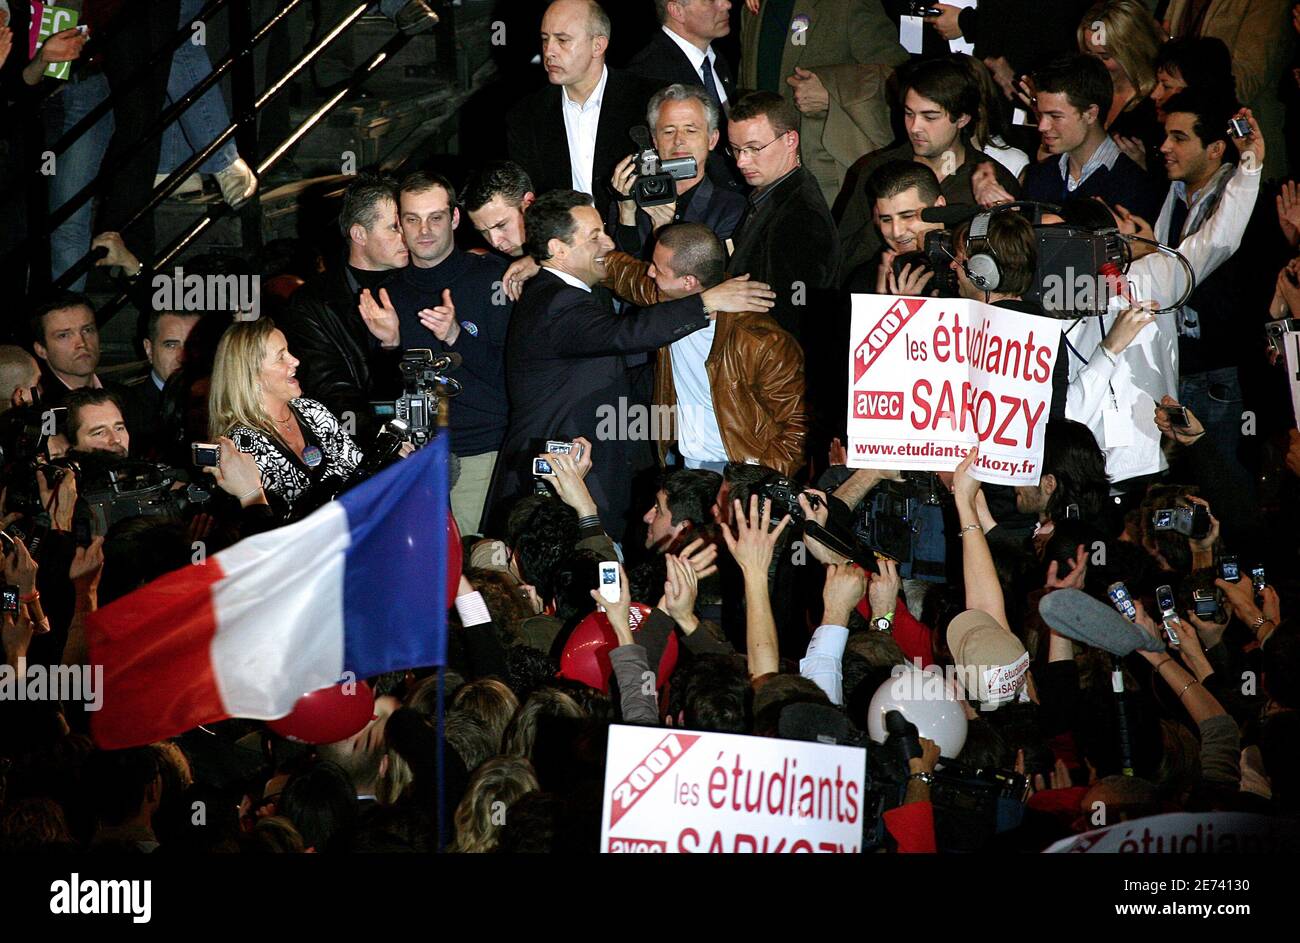 UMP presidential candidate Nicolas Sarkozy and singer Faudel pictured during a campaign meeting at Le Zenith in Paris, France, on March 18, 2007. Photo by Orban-Taamallah/ABACAPRESS.COM Stock Photo